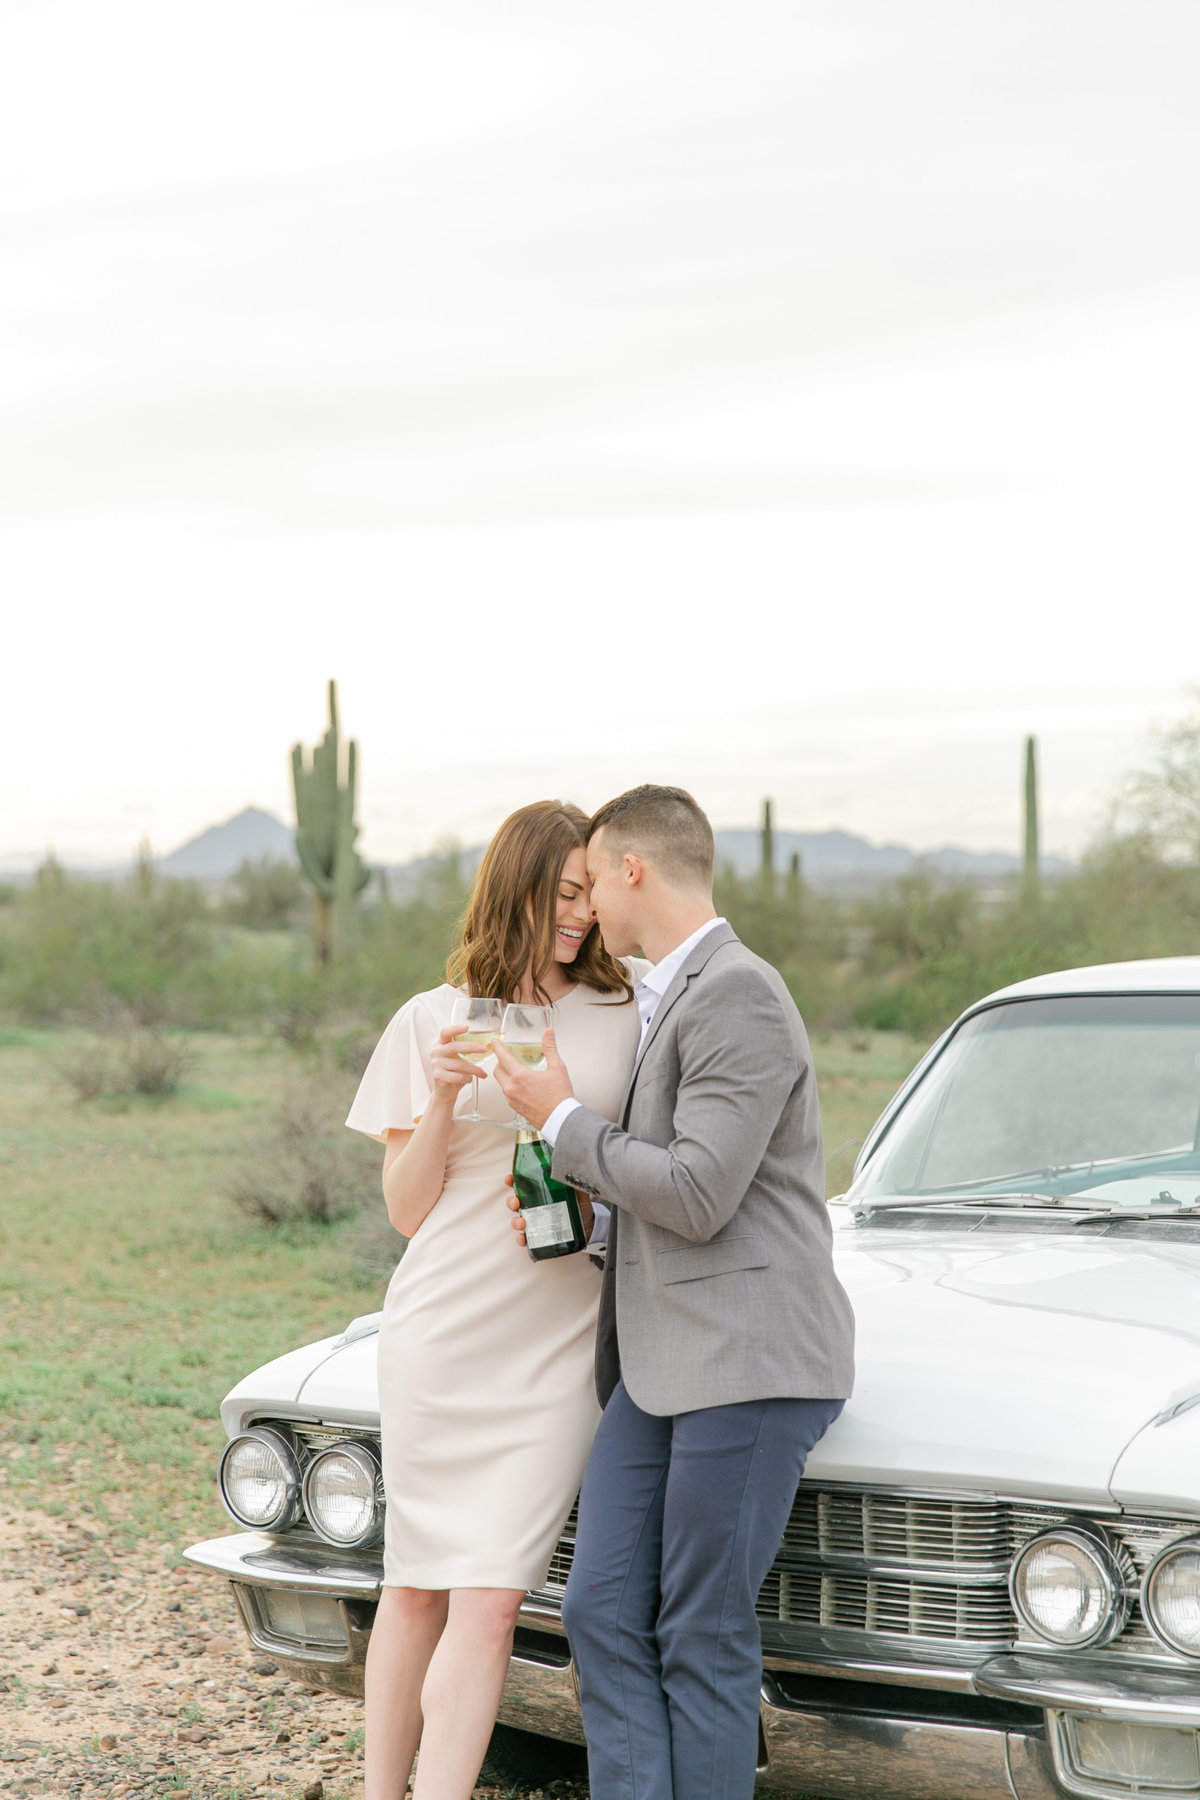 Karlie Colleen Photography - Arizona Engagement Photos- Chacey & Stefan-63